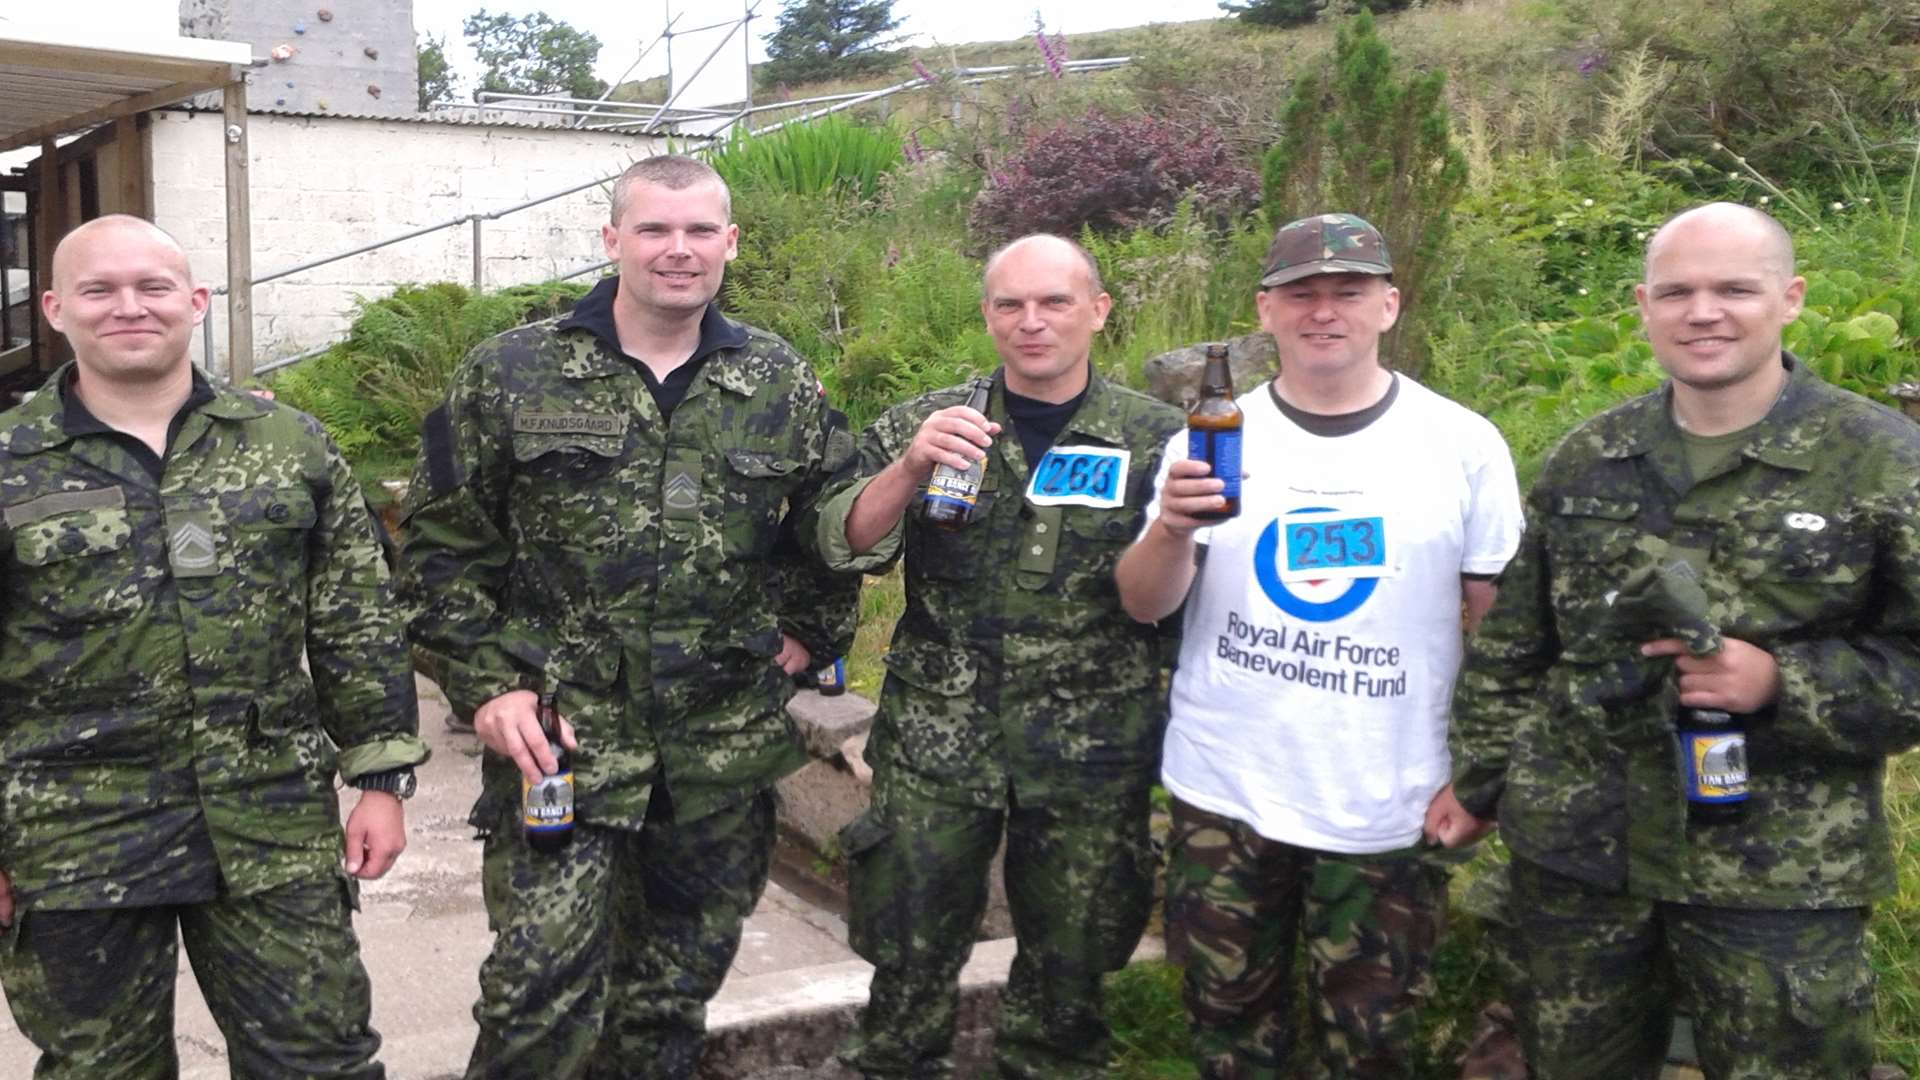 Richard is joined by Danish soldiers celebrating with a beer after completing the challenge